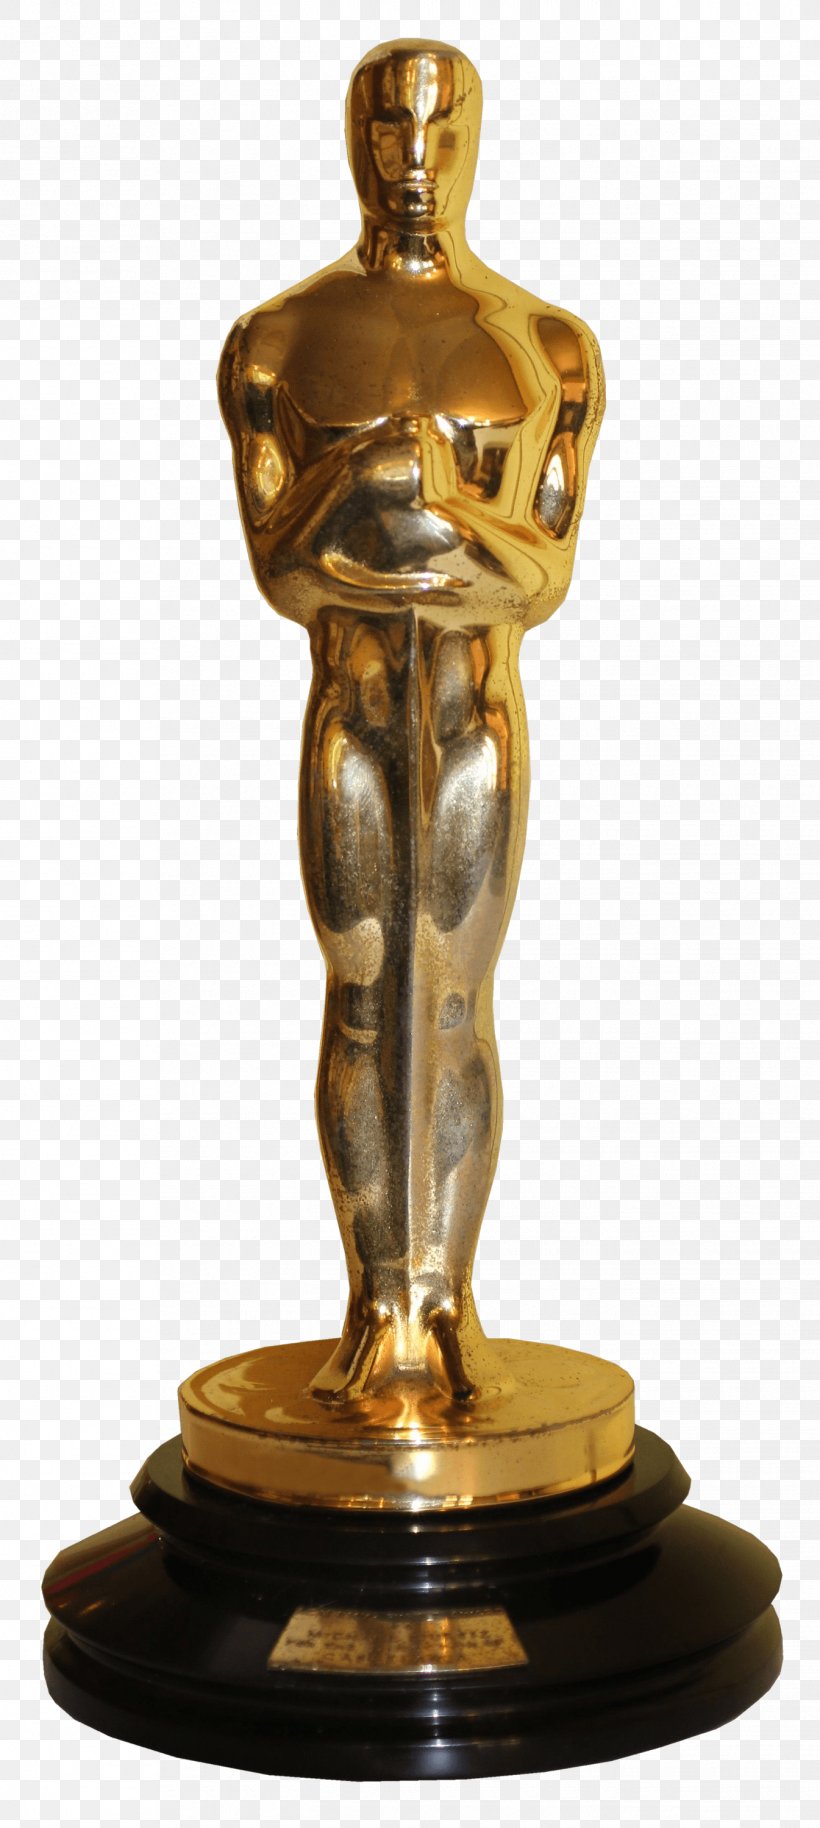 88th Academy Awards 48th Academy Awards Academy Award For Best Picture, PNG, 1345x3000px, 88th Academy Awards, Academy Awards, Academy Award For Best Actor, Academy Award For Best Director, Academy Award For Best Picture Download Free